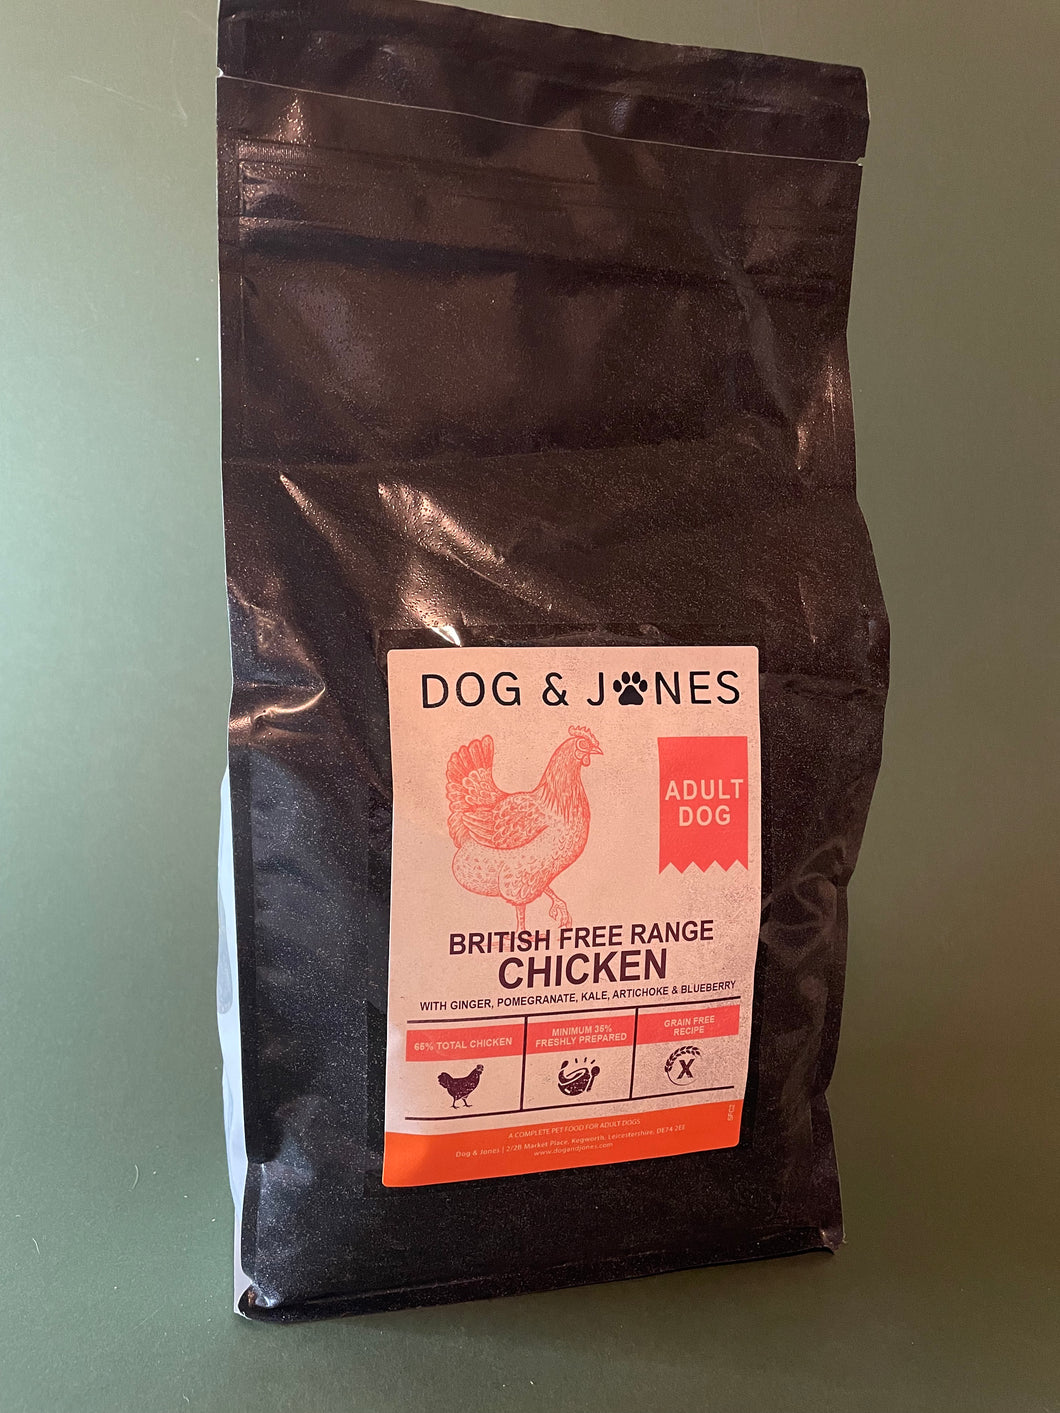 Dog & Jones Superfood Chicken For Adult Dogs